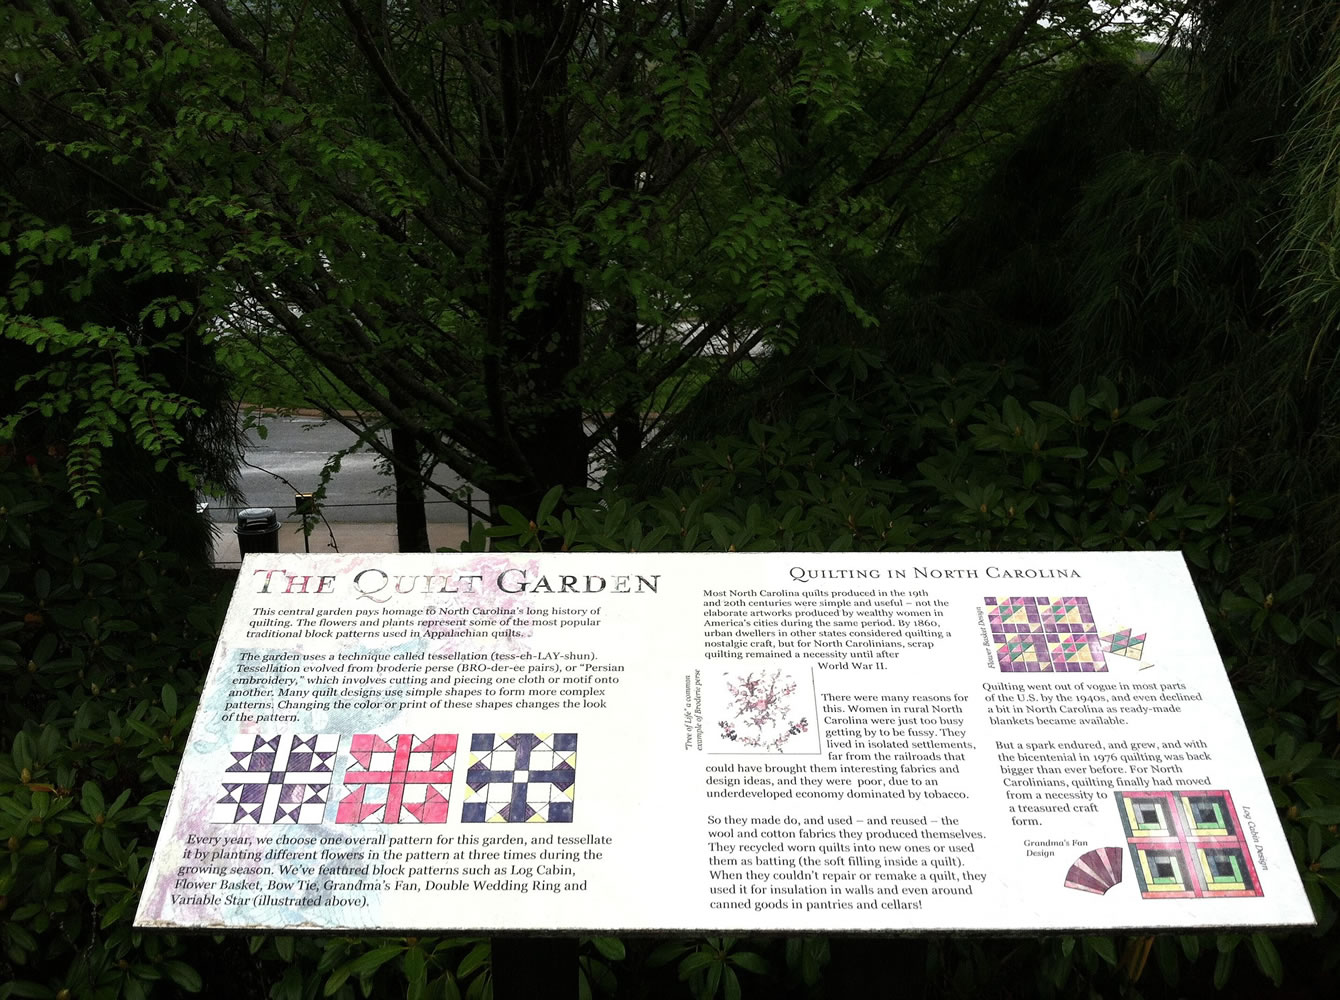 A sign explains the concepts and techniques used to create the quilt garden at the North Carolina Arboretum in Asheville, N.C.